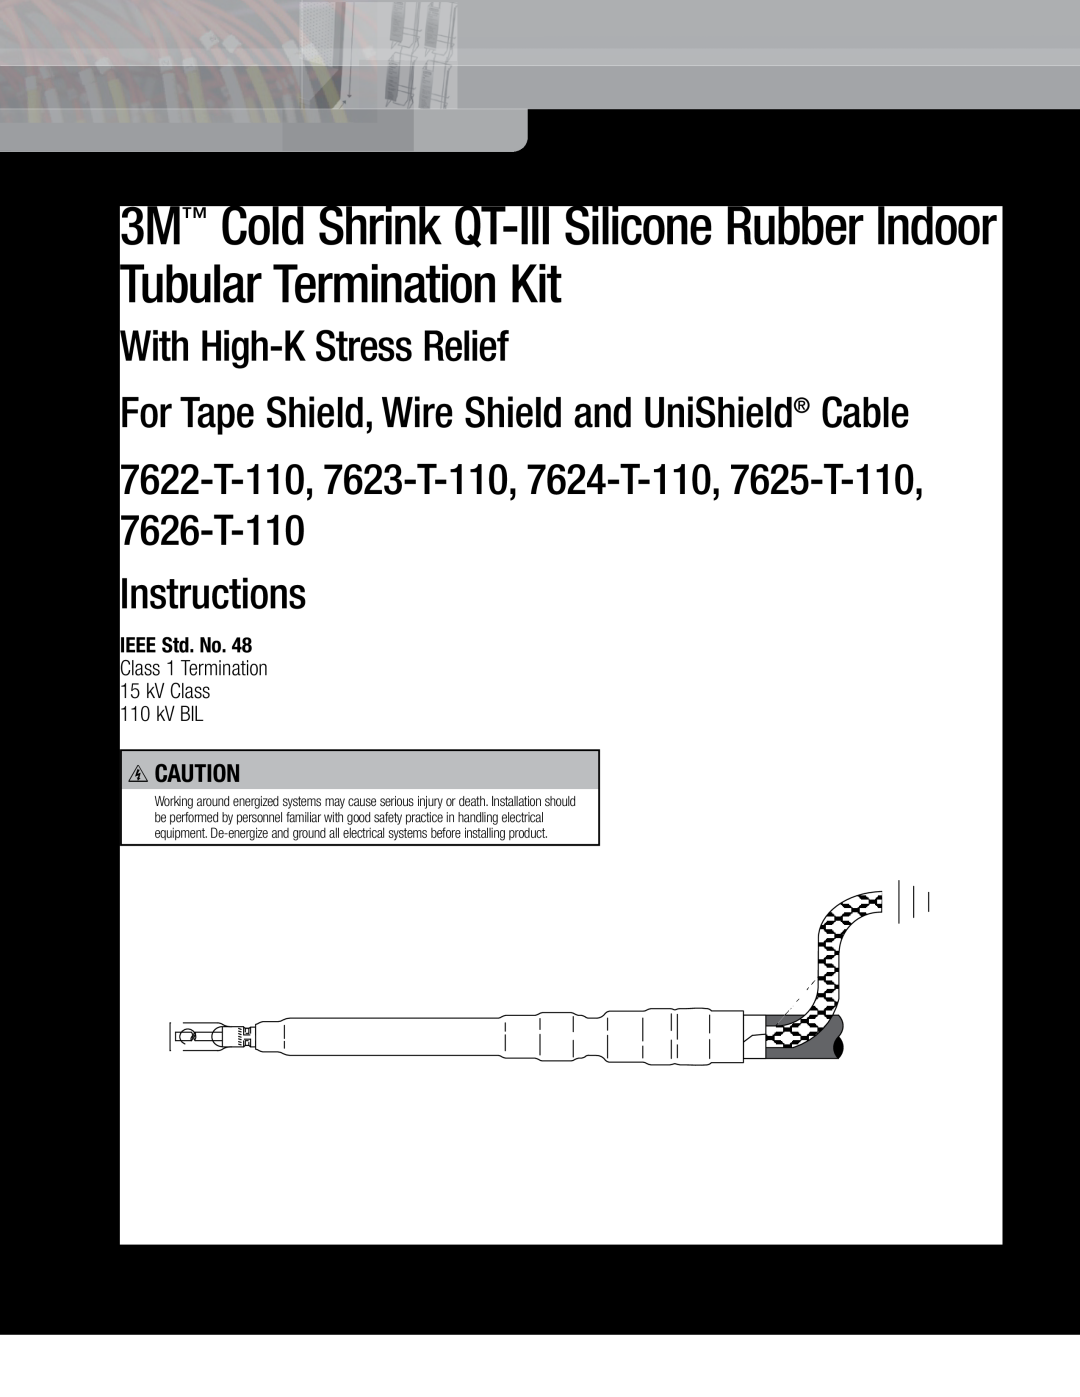 3M 7622-T-110 manual With High-KStress Relief, For Tape Shield, Wire Shield and UniShield Cable, 7626-T-110 Instructions 